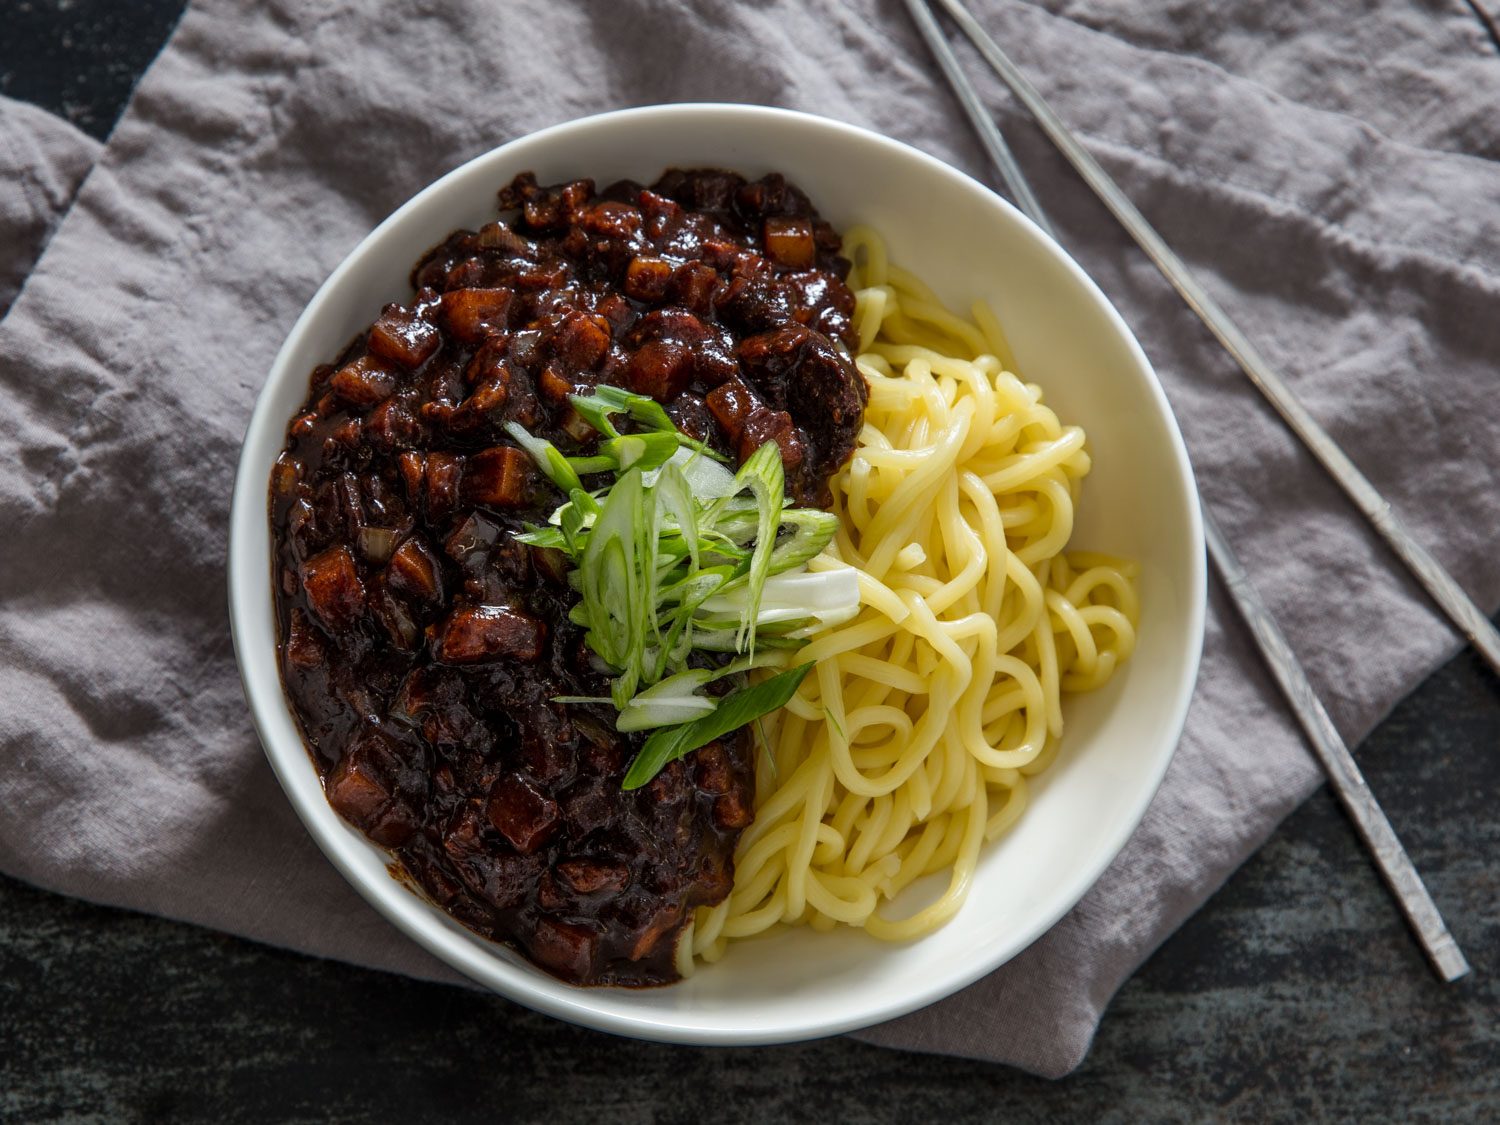 Overhead shot of a bowl of jjajangmyeon (wheat noodles and black bean sauce)